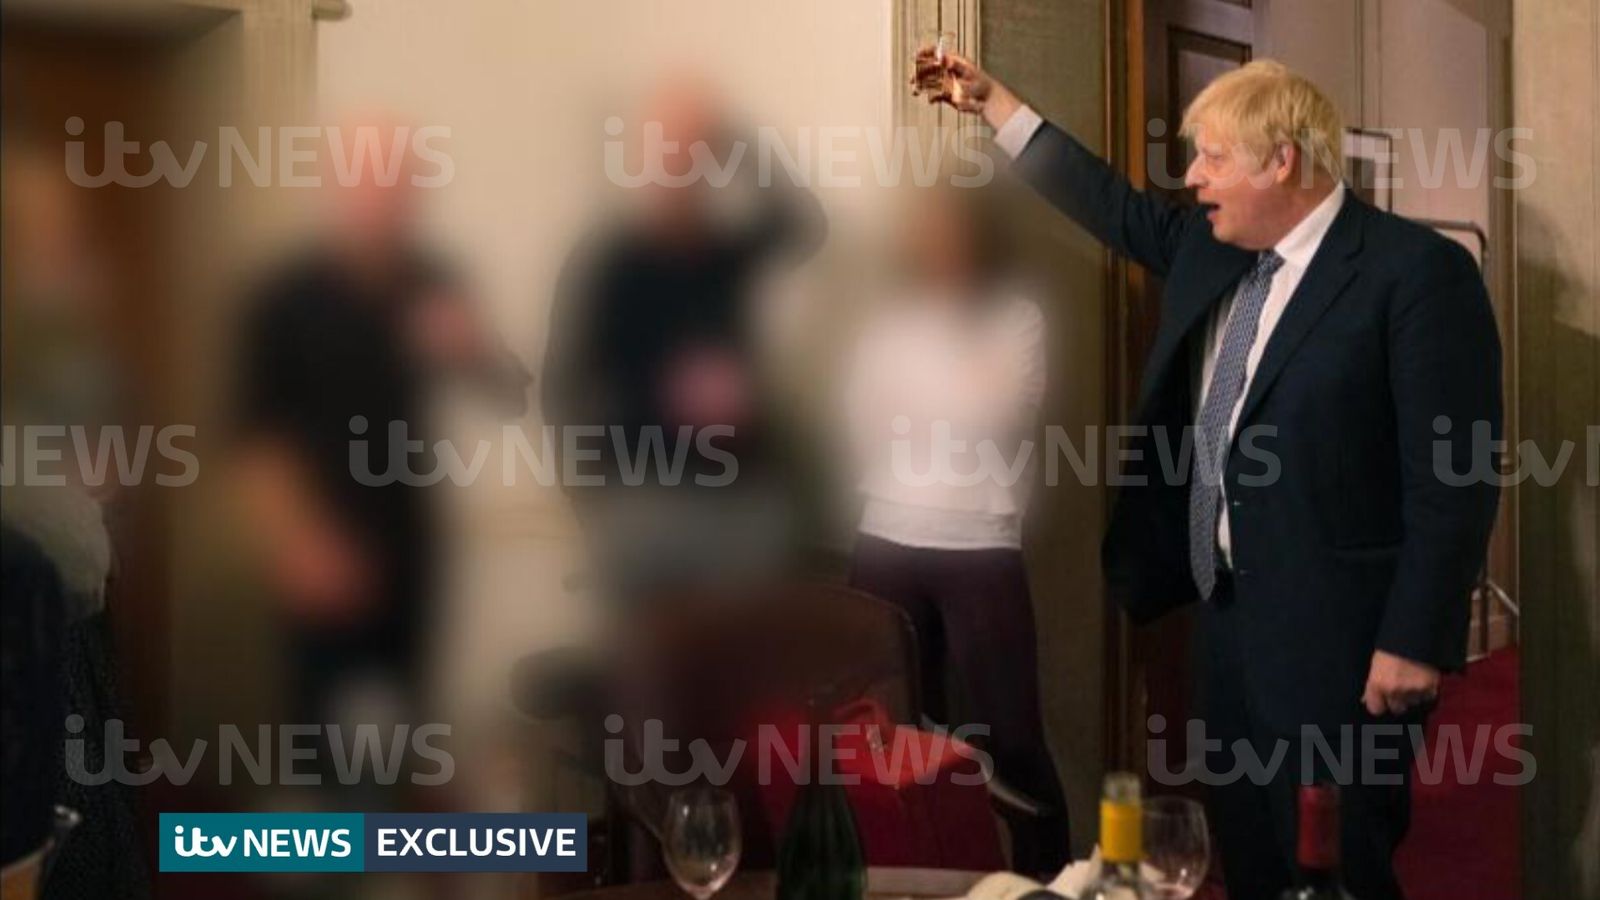 Sadiq Khan demands explanation from police after ‘smoking gun’ pictures – as Shapps denies PM was partying |  PoliticsNews